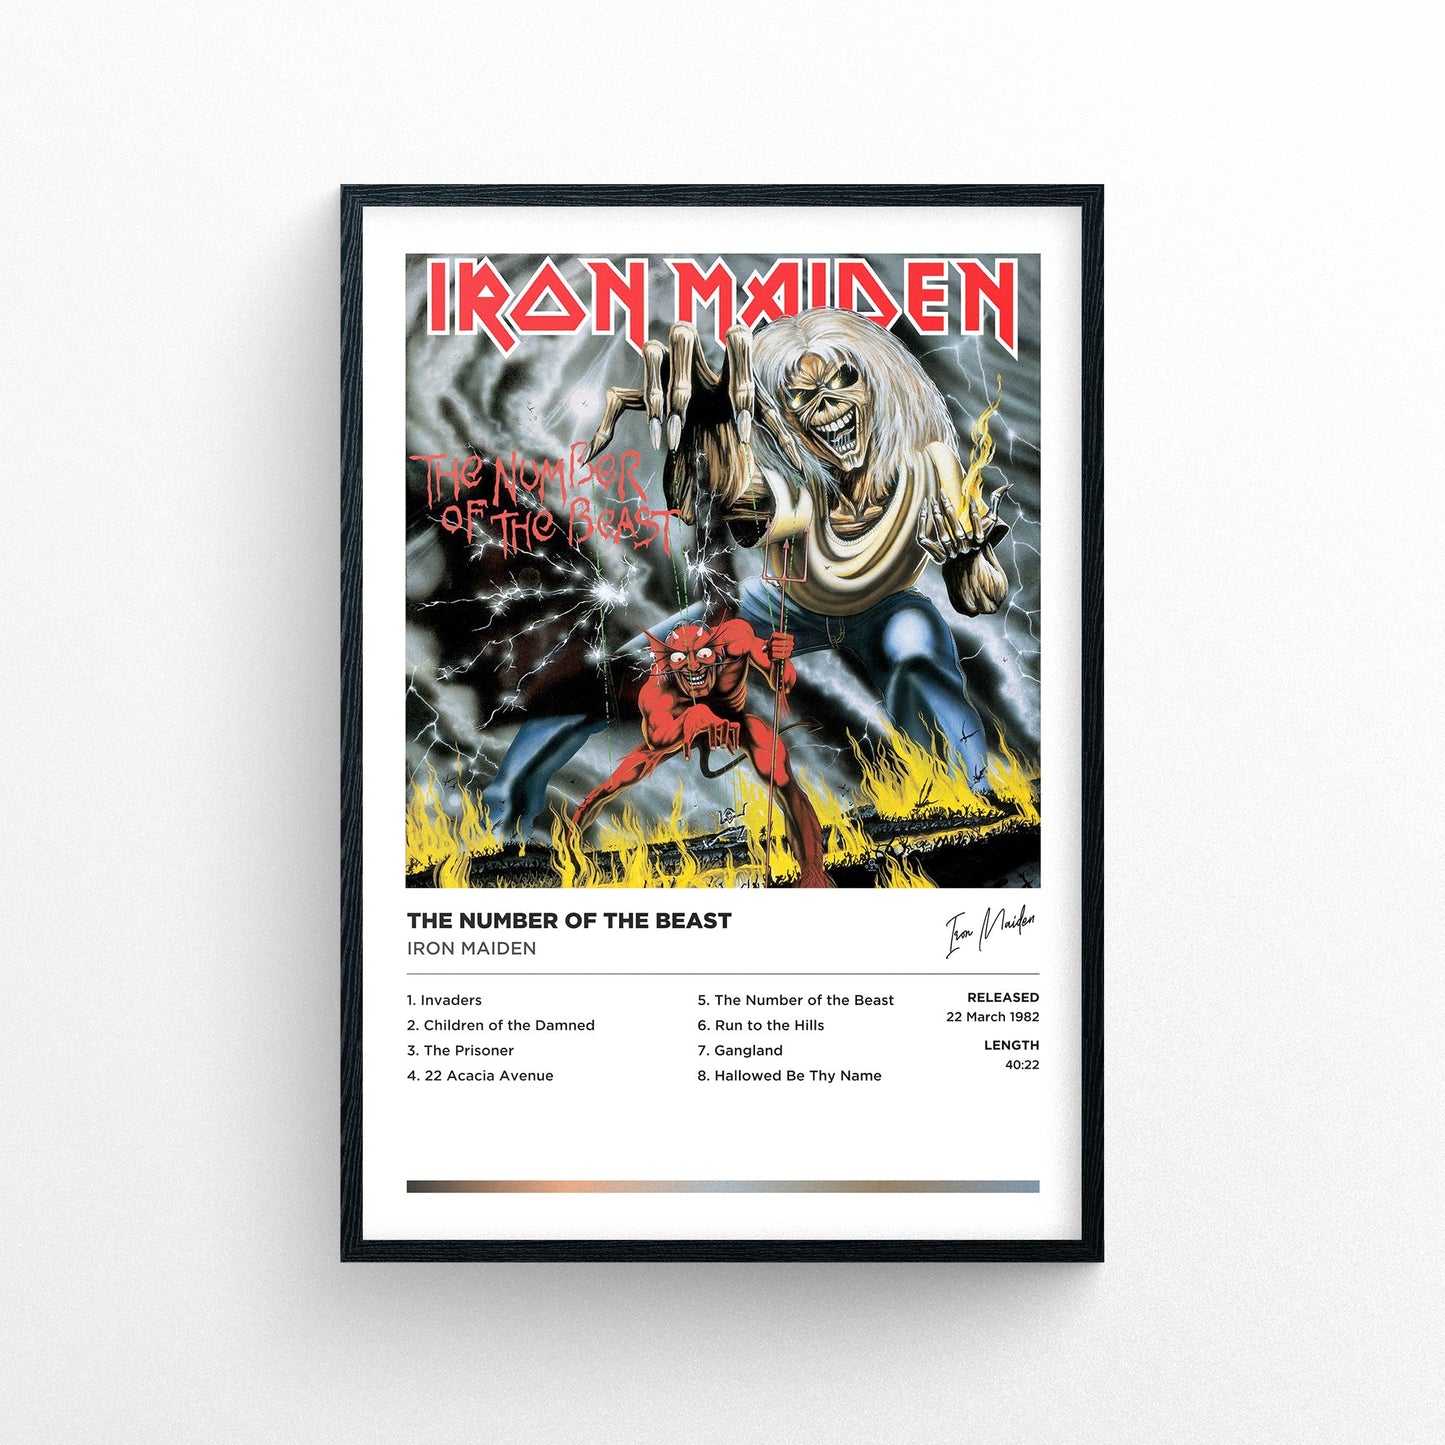 Iron Maiden - The Number of the Beast Framed Poster Print | Polaroid Style | Album Cover Artwork